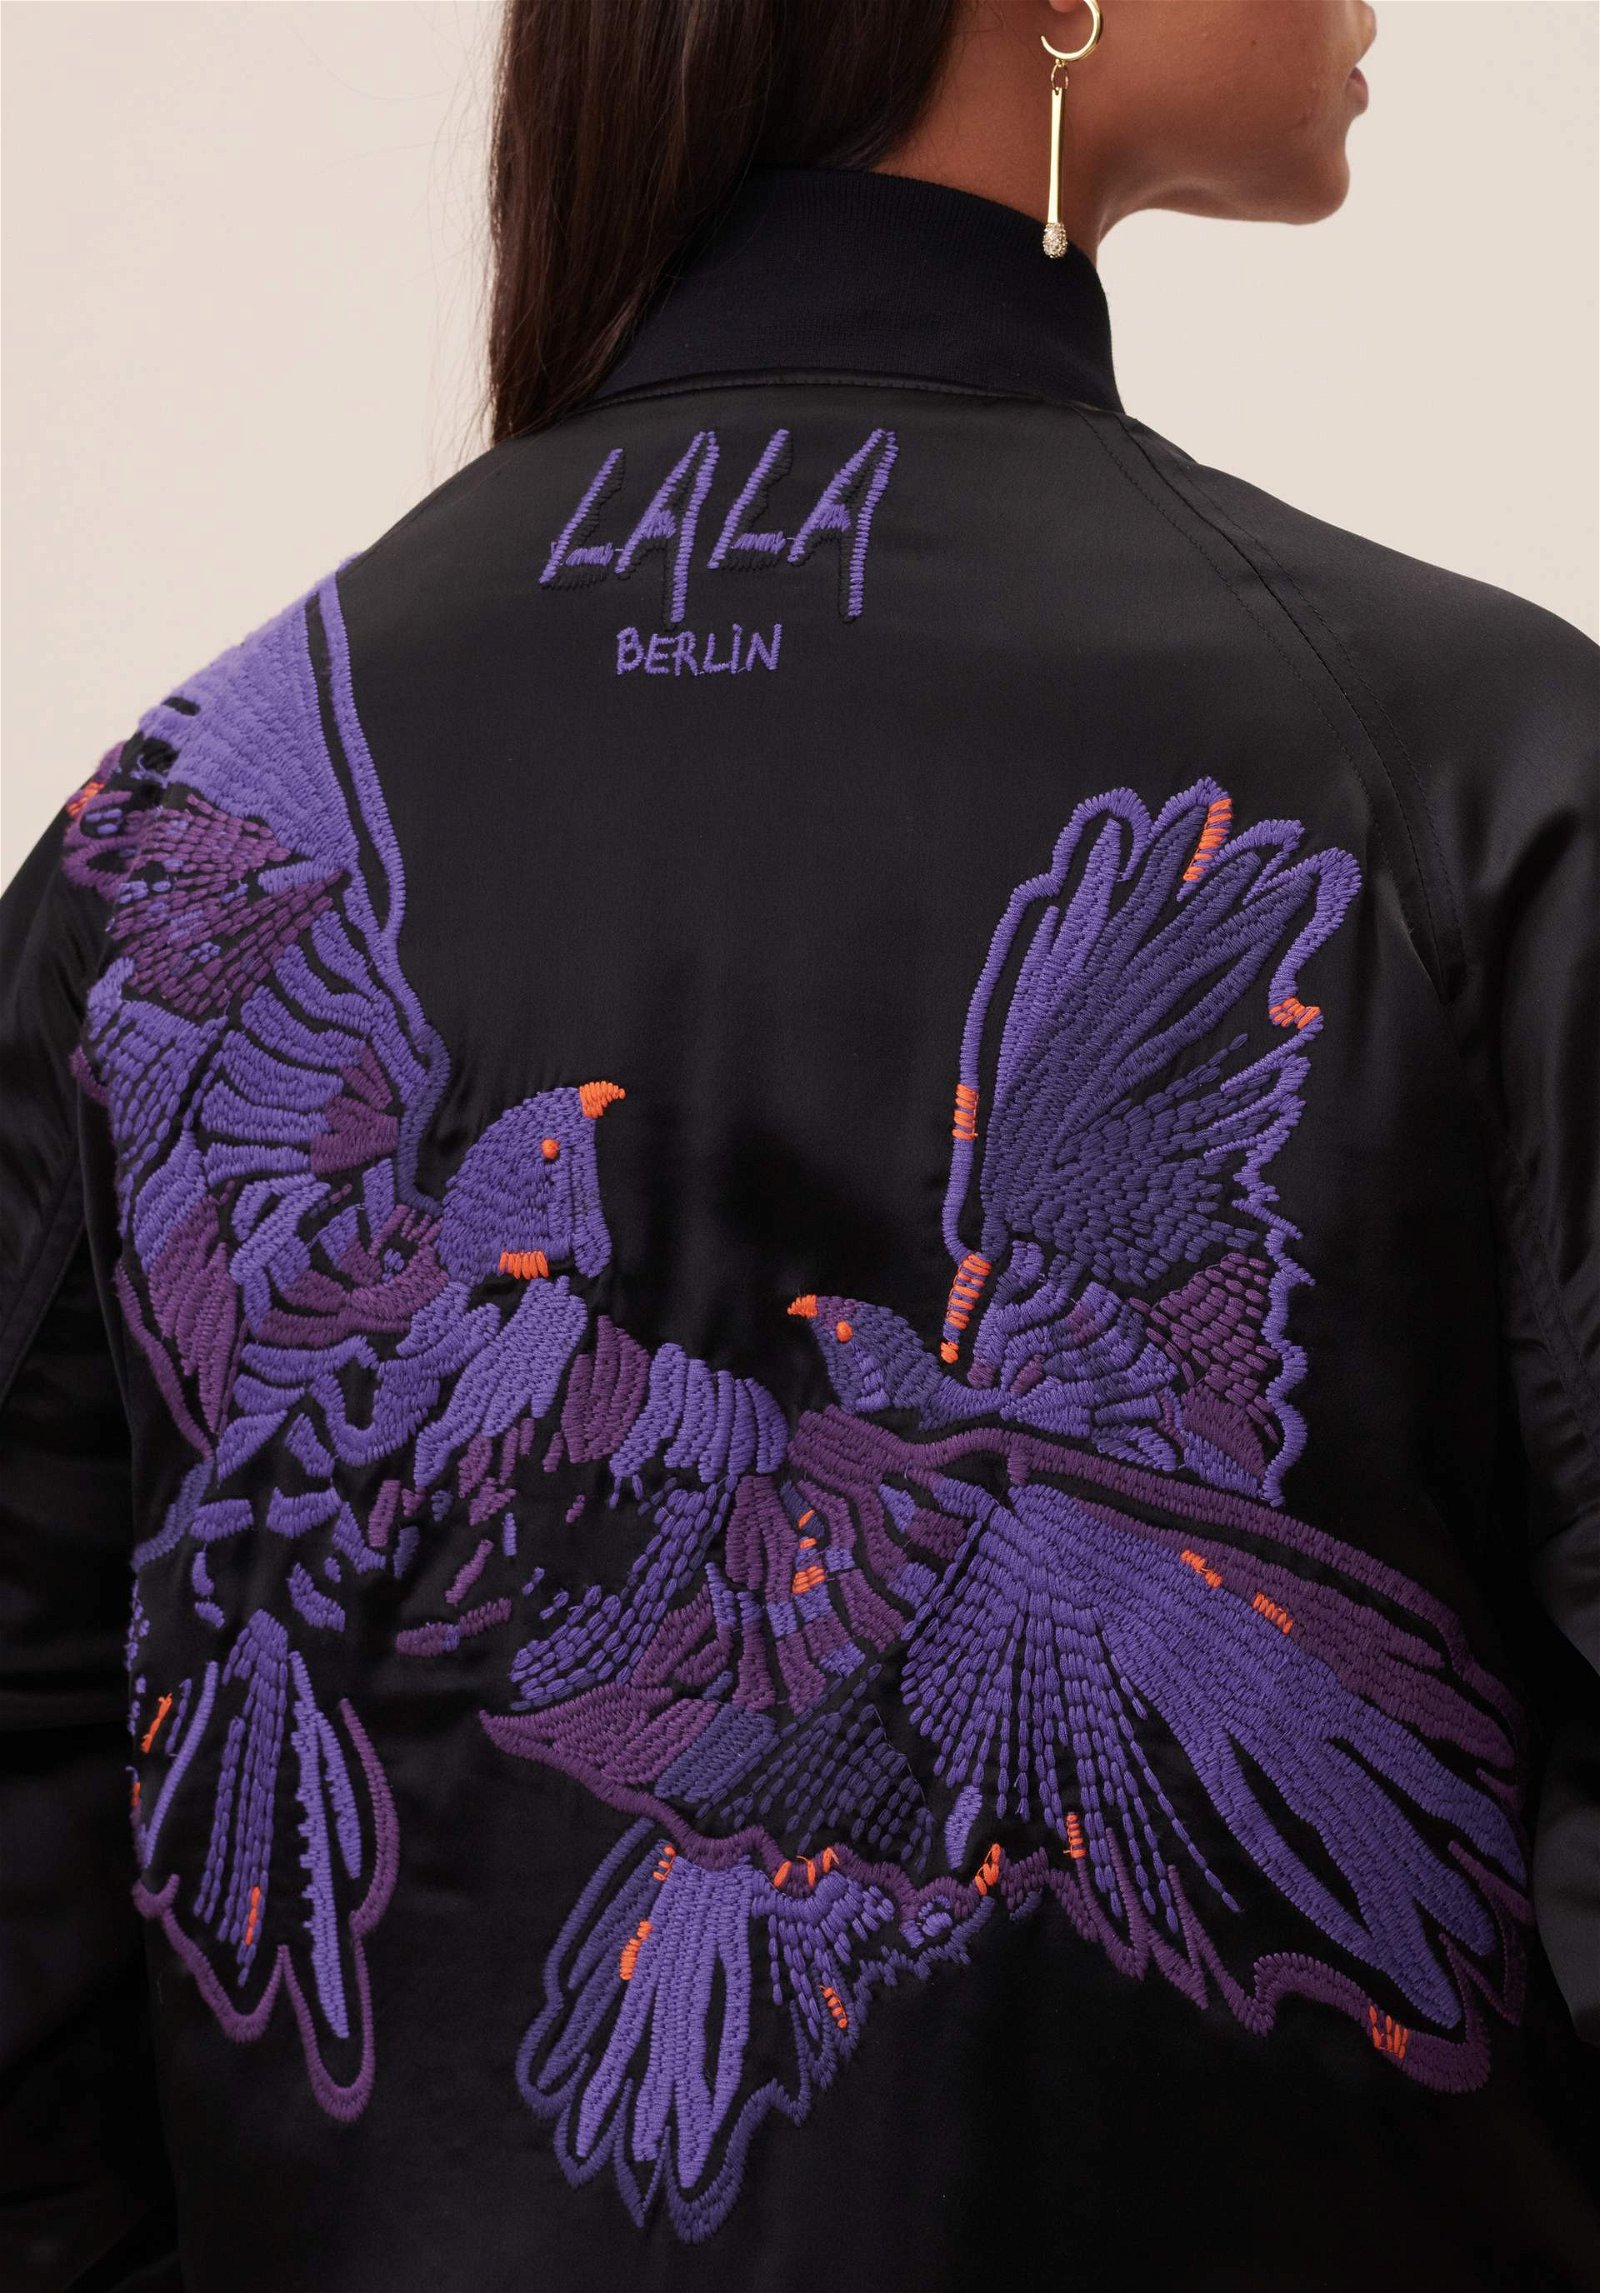 Lala Berlin: GUESS WHO'S BACK… JACKET JIBBY RESTOCKED! | Milled